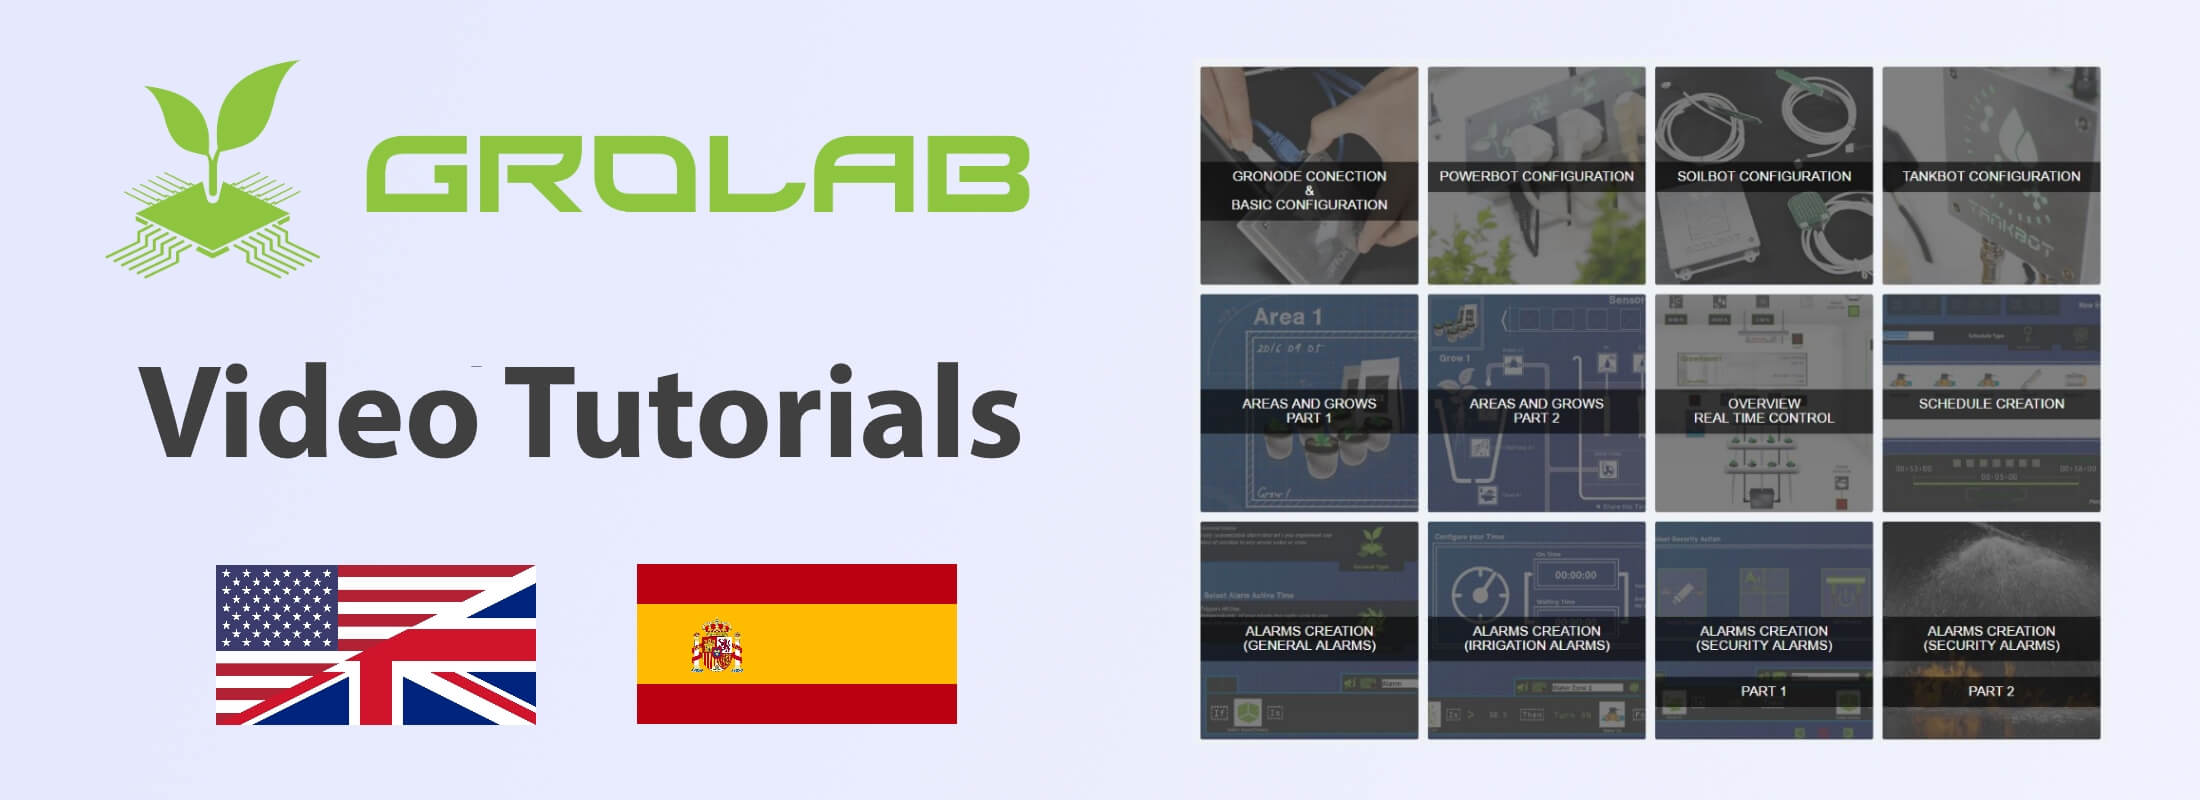 GroLab™ video tutorials available banner - GroLab™ logo on the left, under the logo the text "Video Tutorials" and 2 flags representing Spanish and English languages, on the right side there are the video tutorials thumbnails